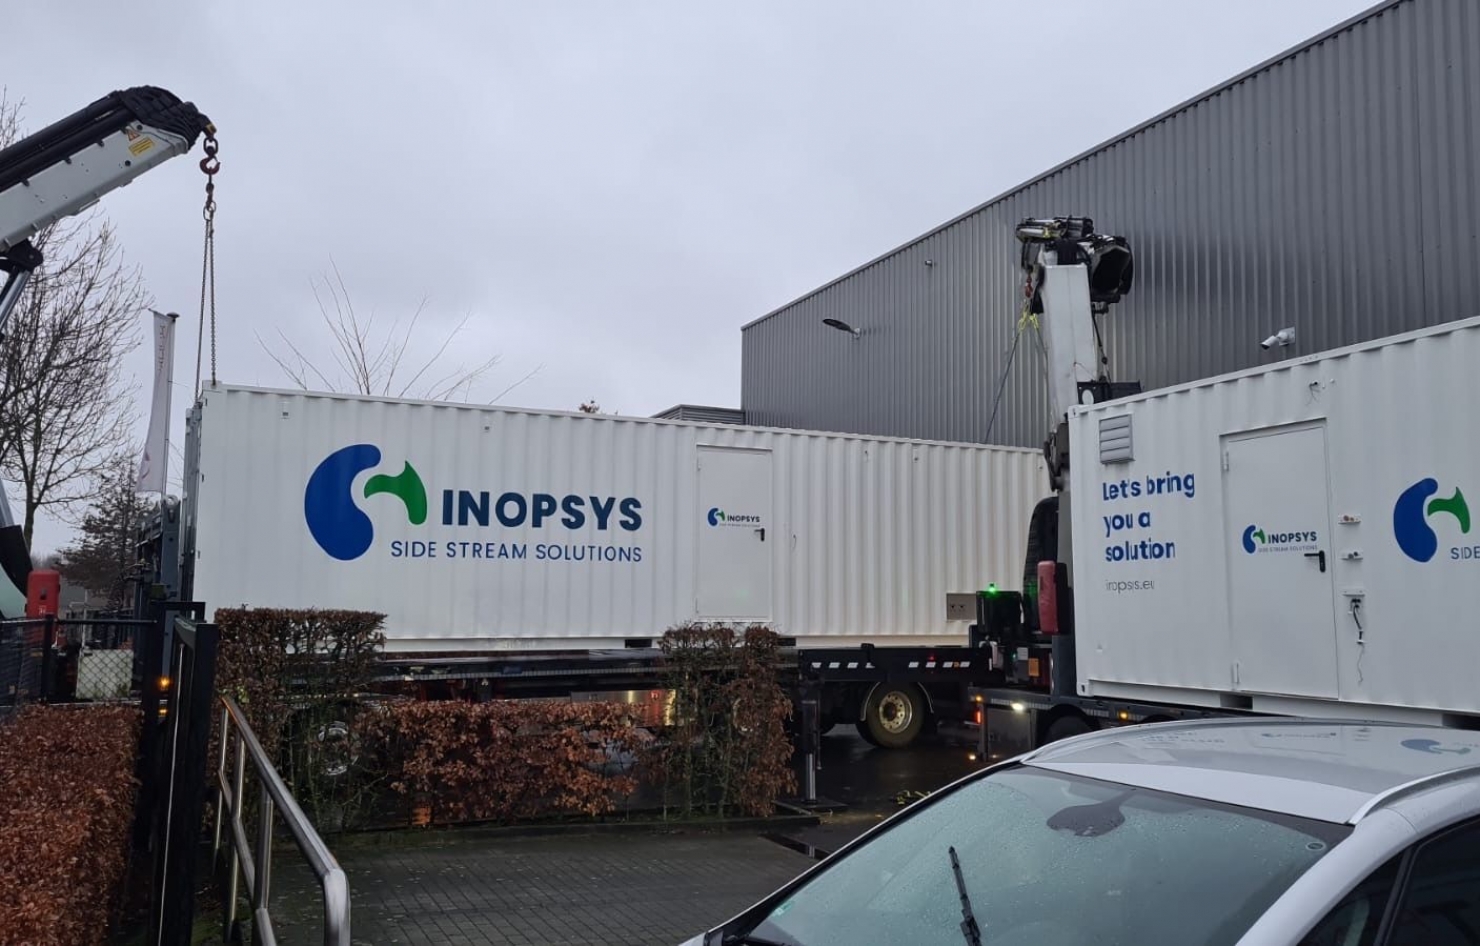 InOpsys NV Revolutionizes On-Site Wastewater Treatment with Mobile and Modular Solutions